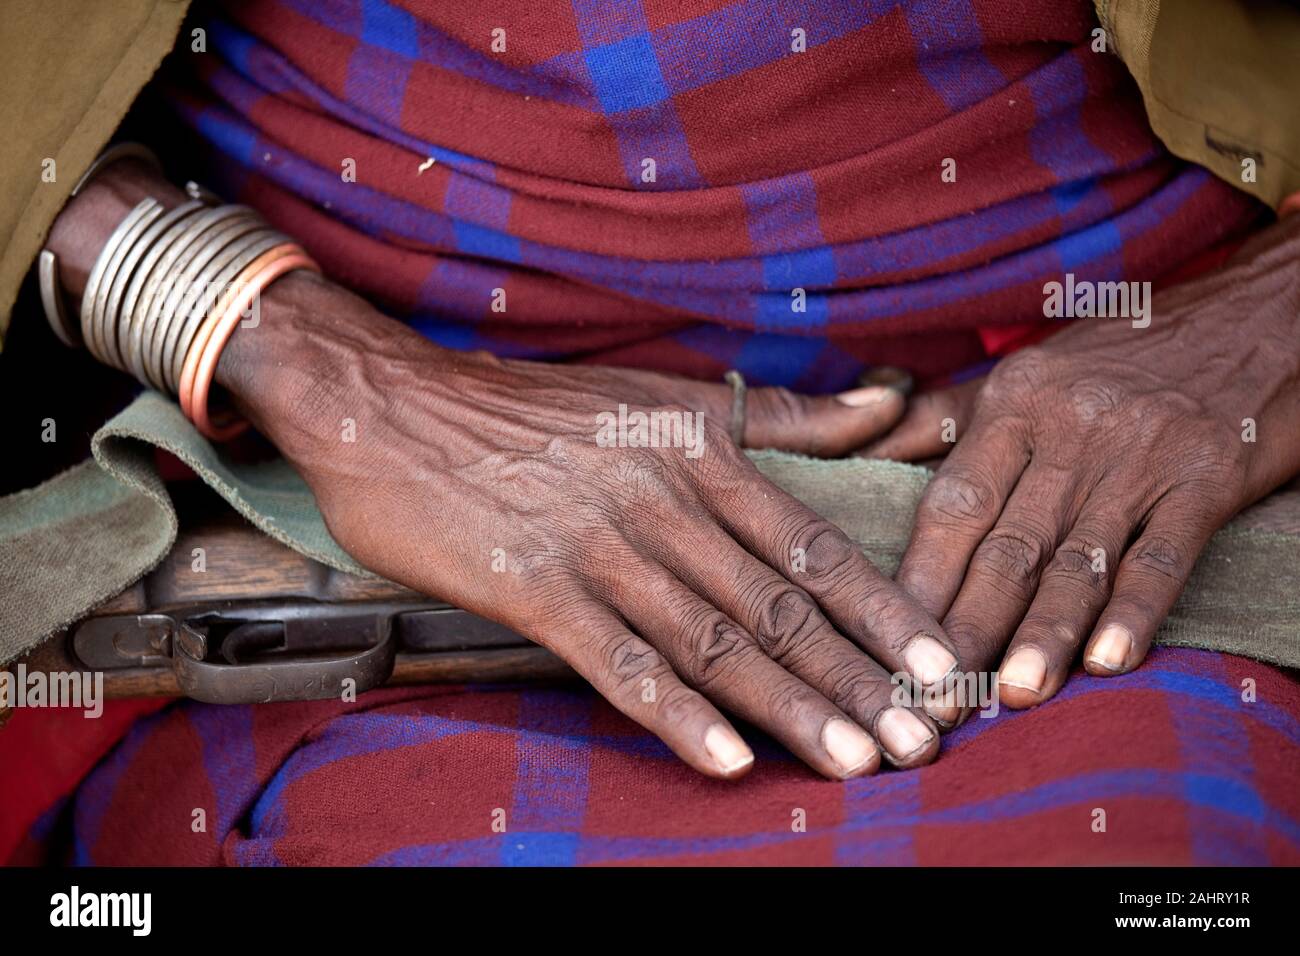 Hands of a Dassanech tribesman, warrior, holding a rifle, Omo valley, Ethiopia Stock Photo